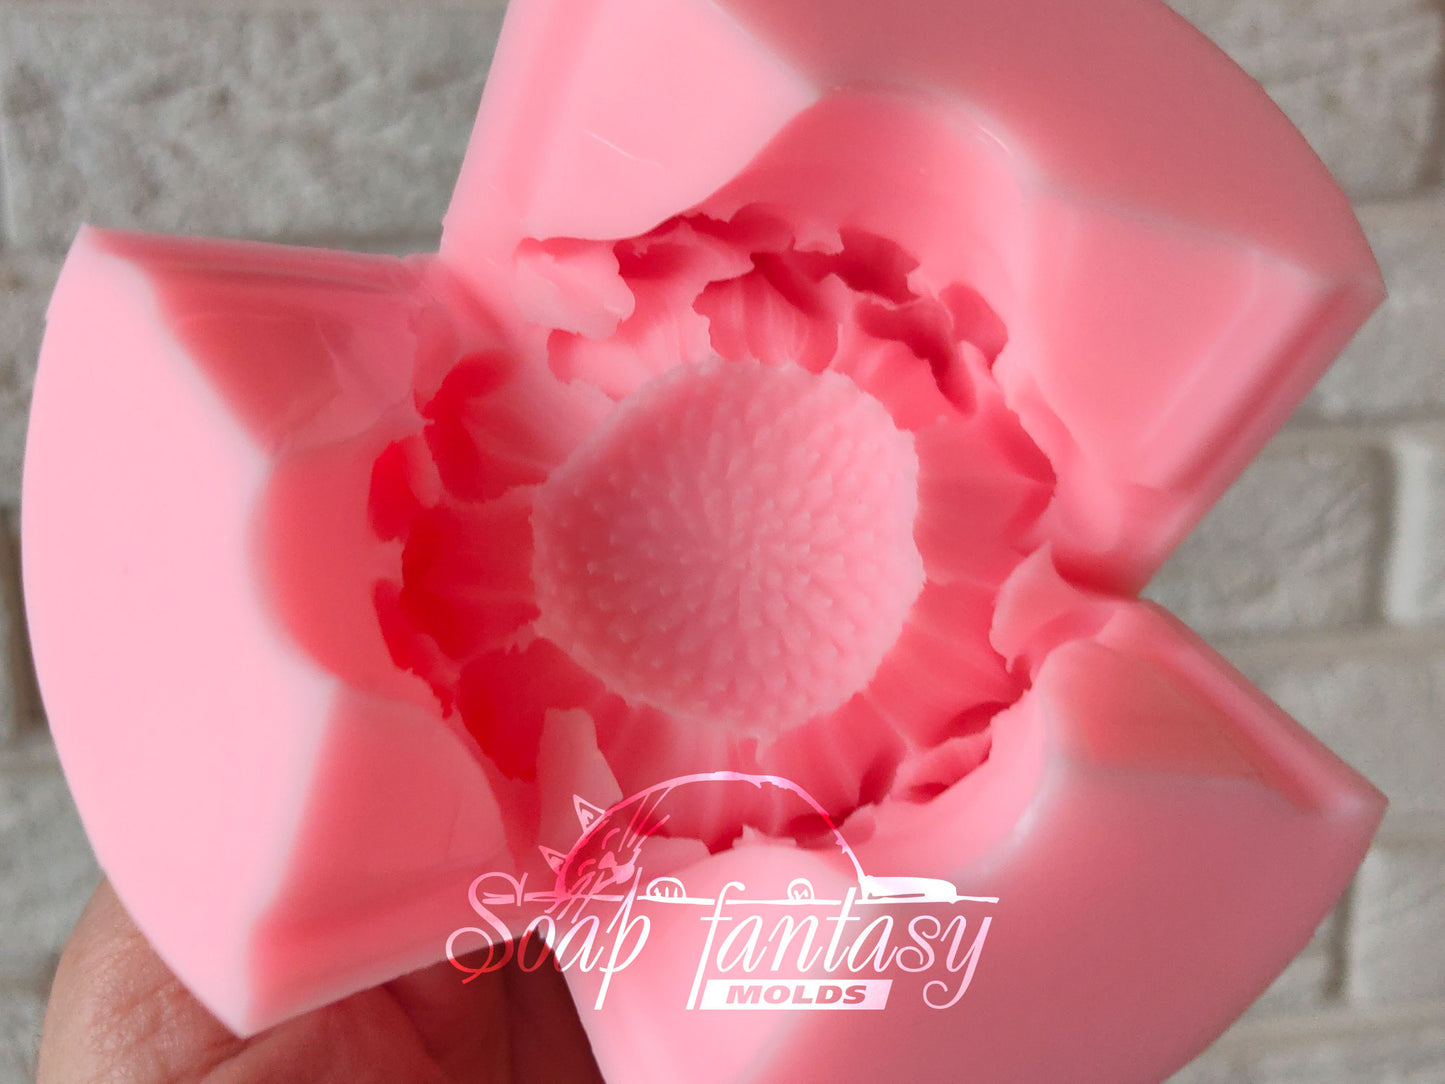 Sunflower (medium) silicone mold for soap making